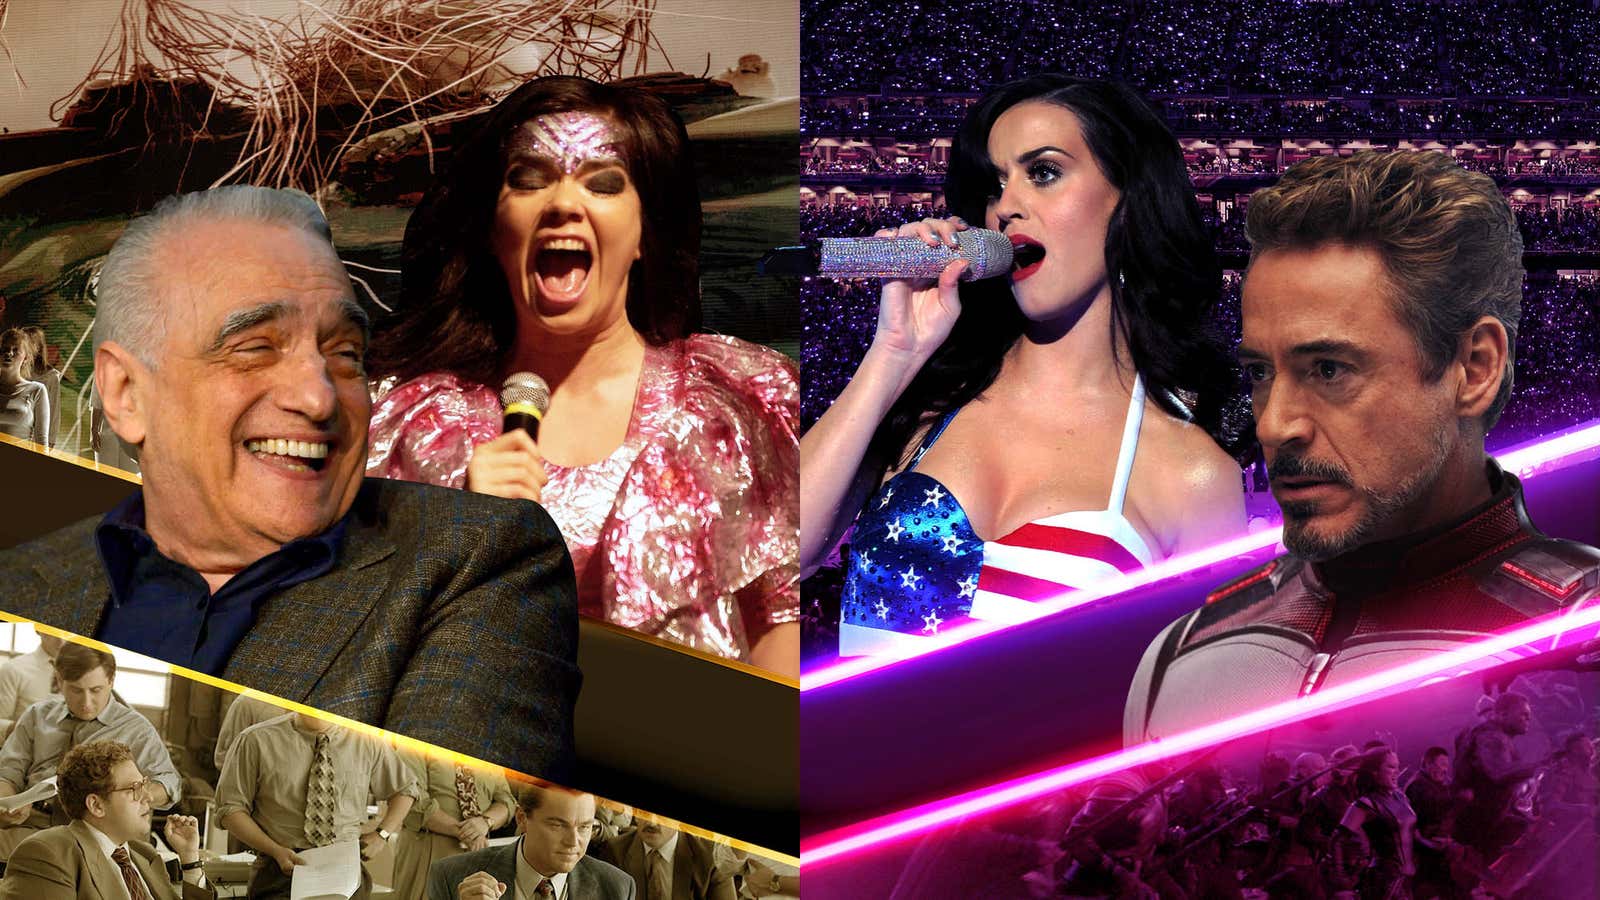 Choose your fighter: Are you on the side of Martin Scorsese (Photo: Michael Tullberg/Getty Images) and Björk (Photo: Jim Dyson/Getty Images) or Katy Perry (Photo: Kevin Winter/Getty Images for VH1) and Tony Stark (Screenshot: Film Frame)? And what if this is the wrong fight?